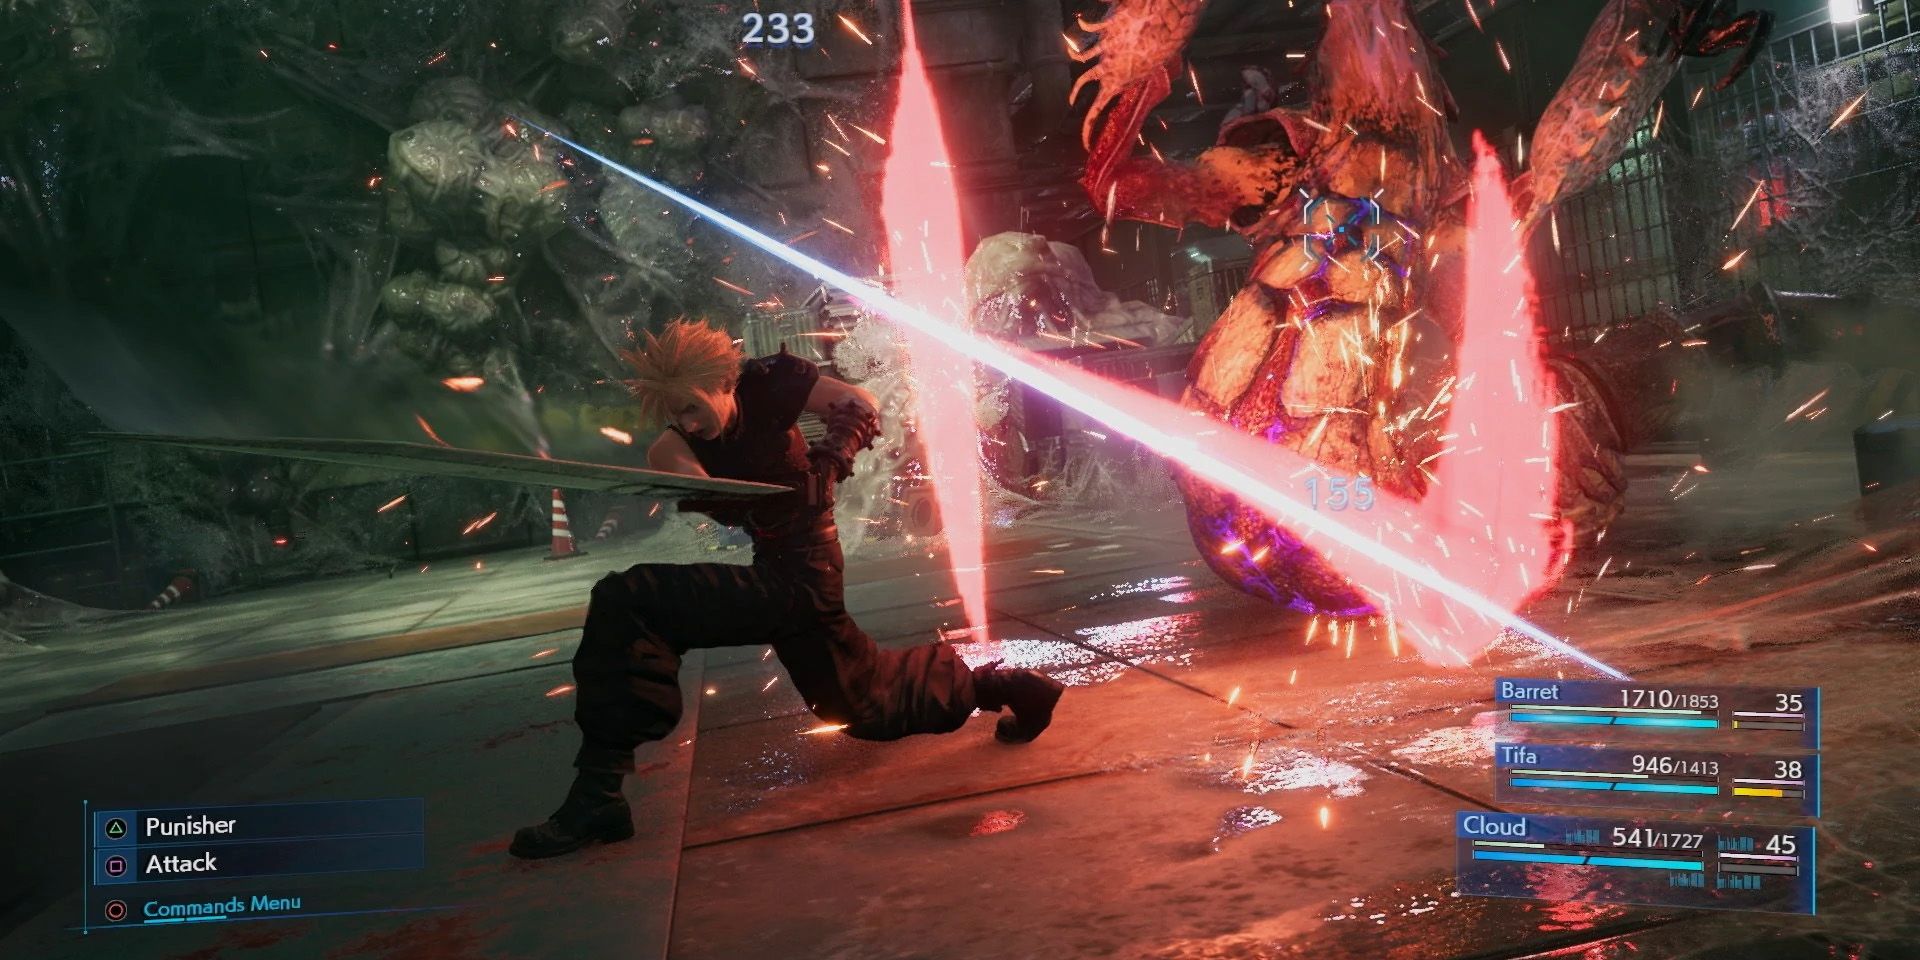 Cloud uses one of his limit breaks in Final Fantasy VII Remake